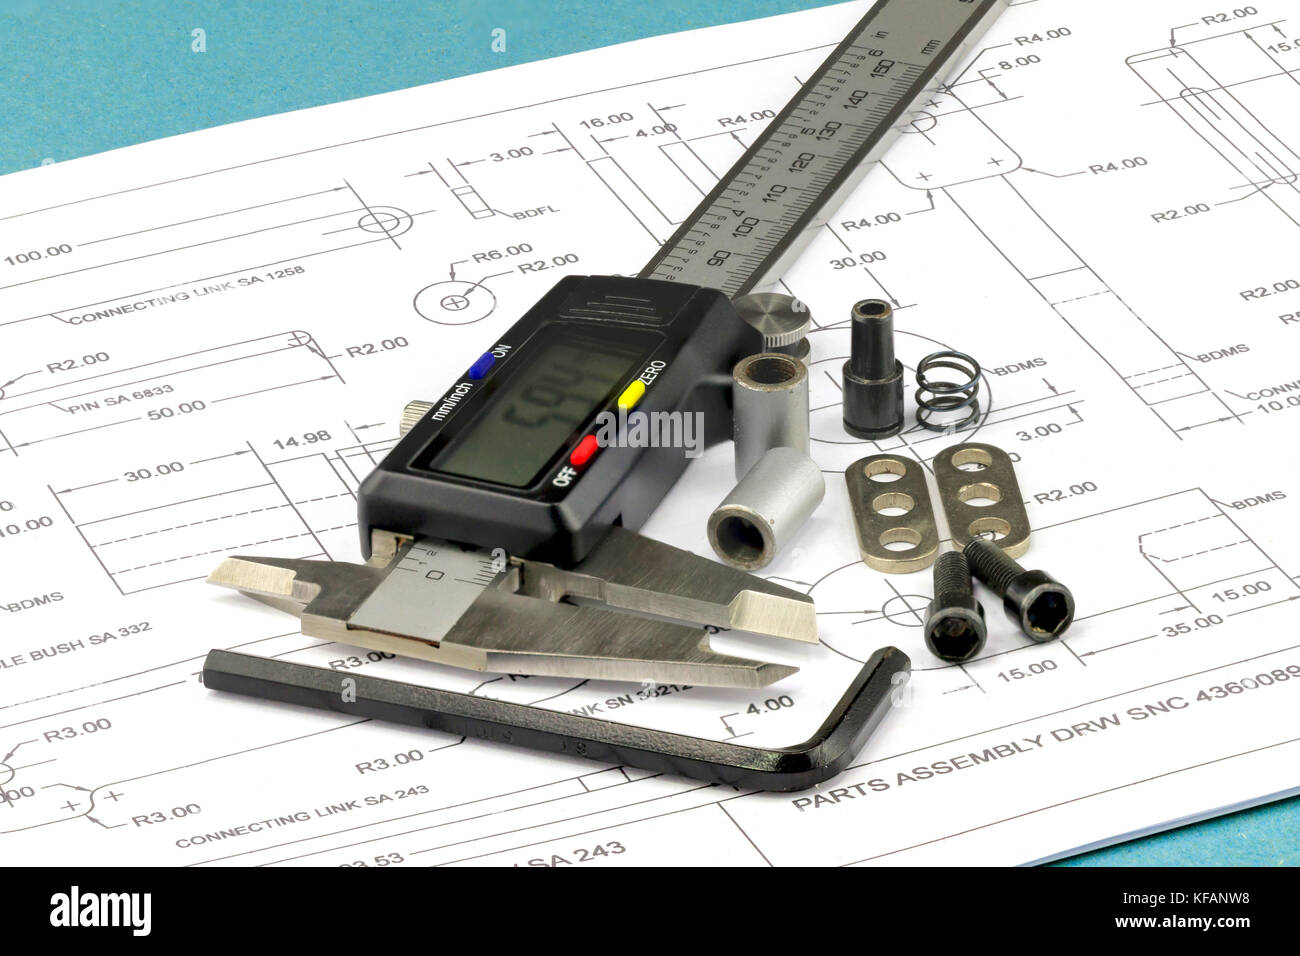 Vernier calliper, metal parts and allen key placed on an engineering drawing background Stock Photo